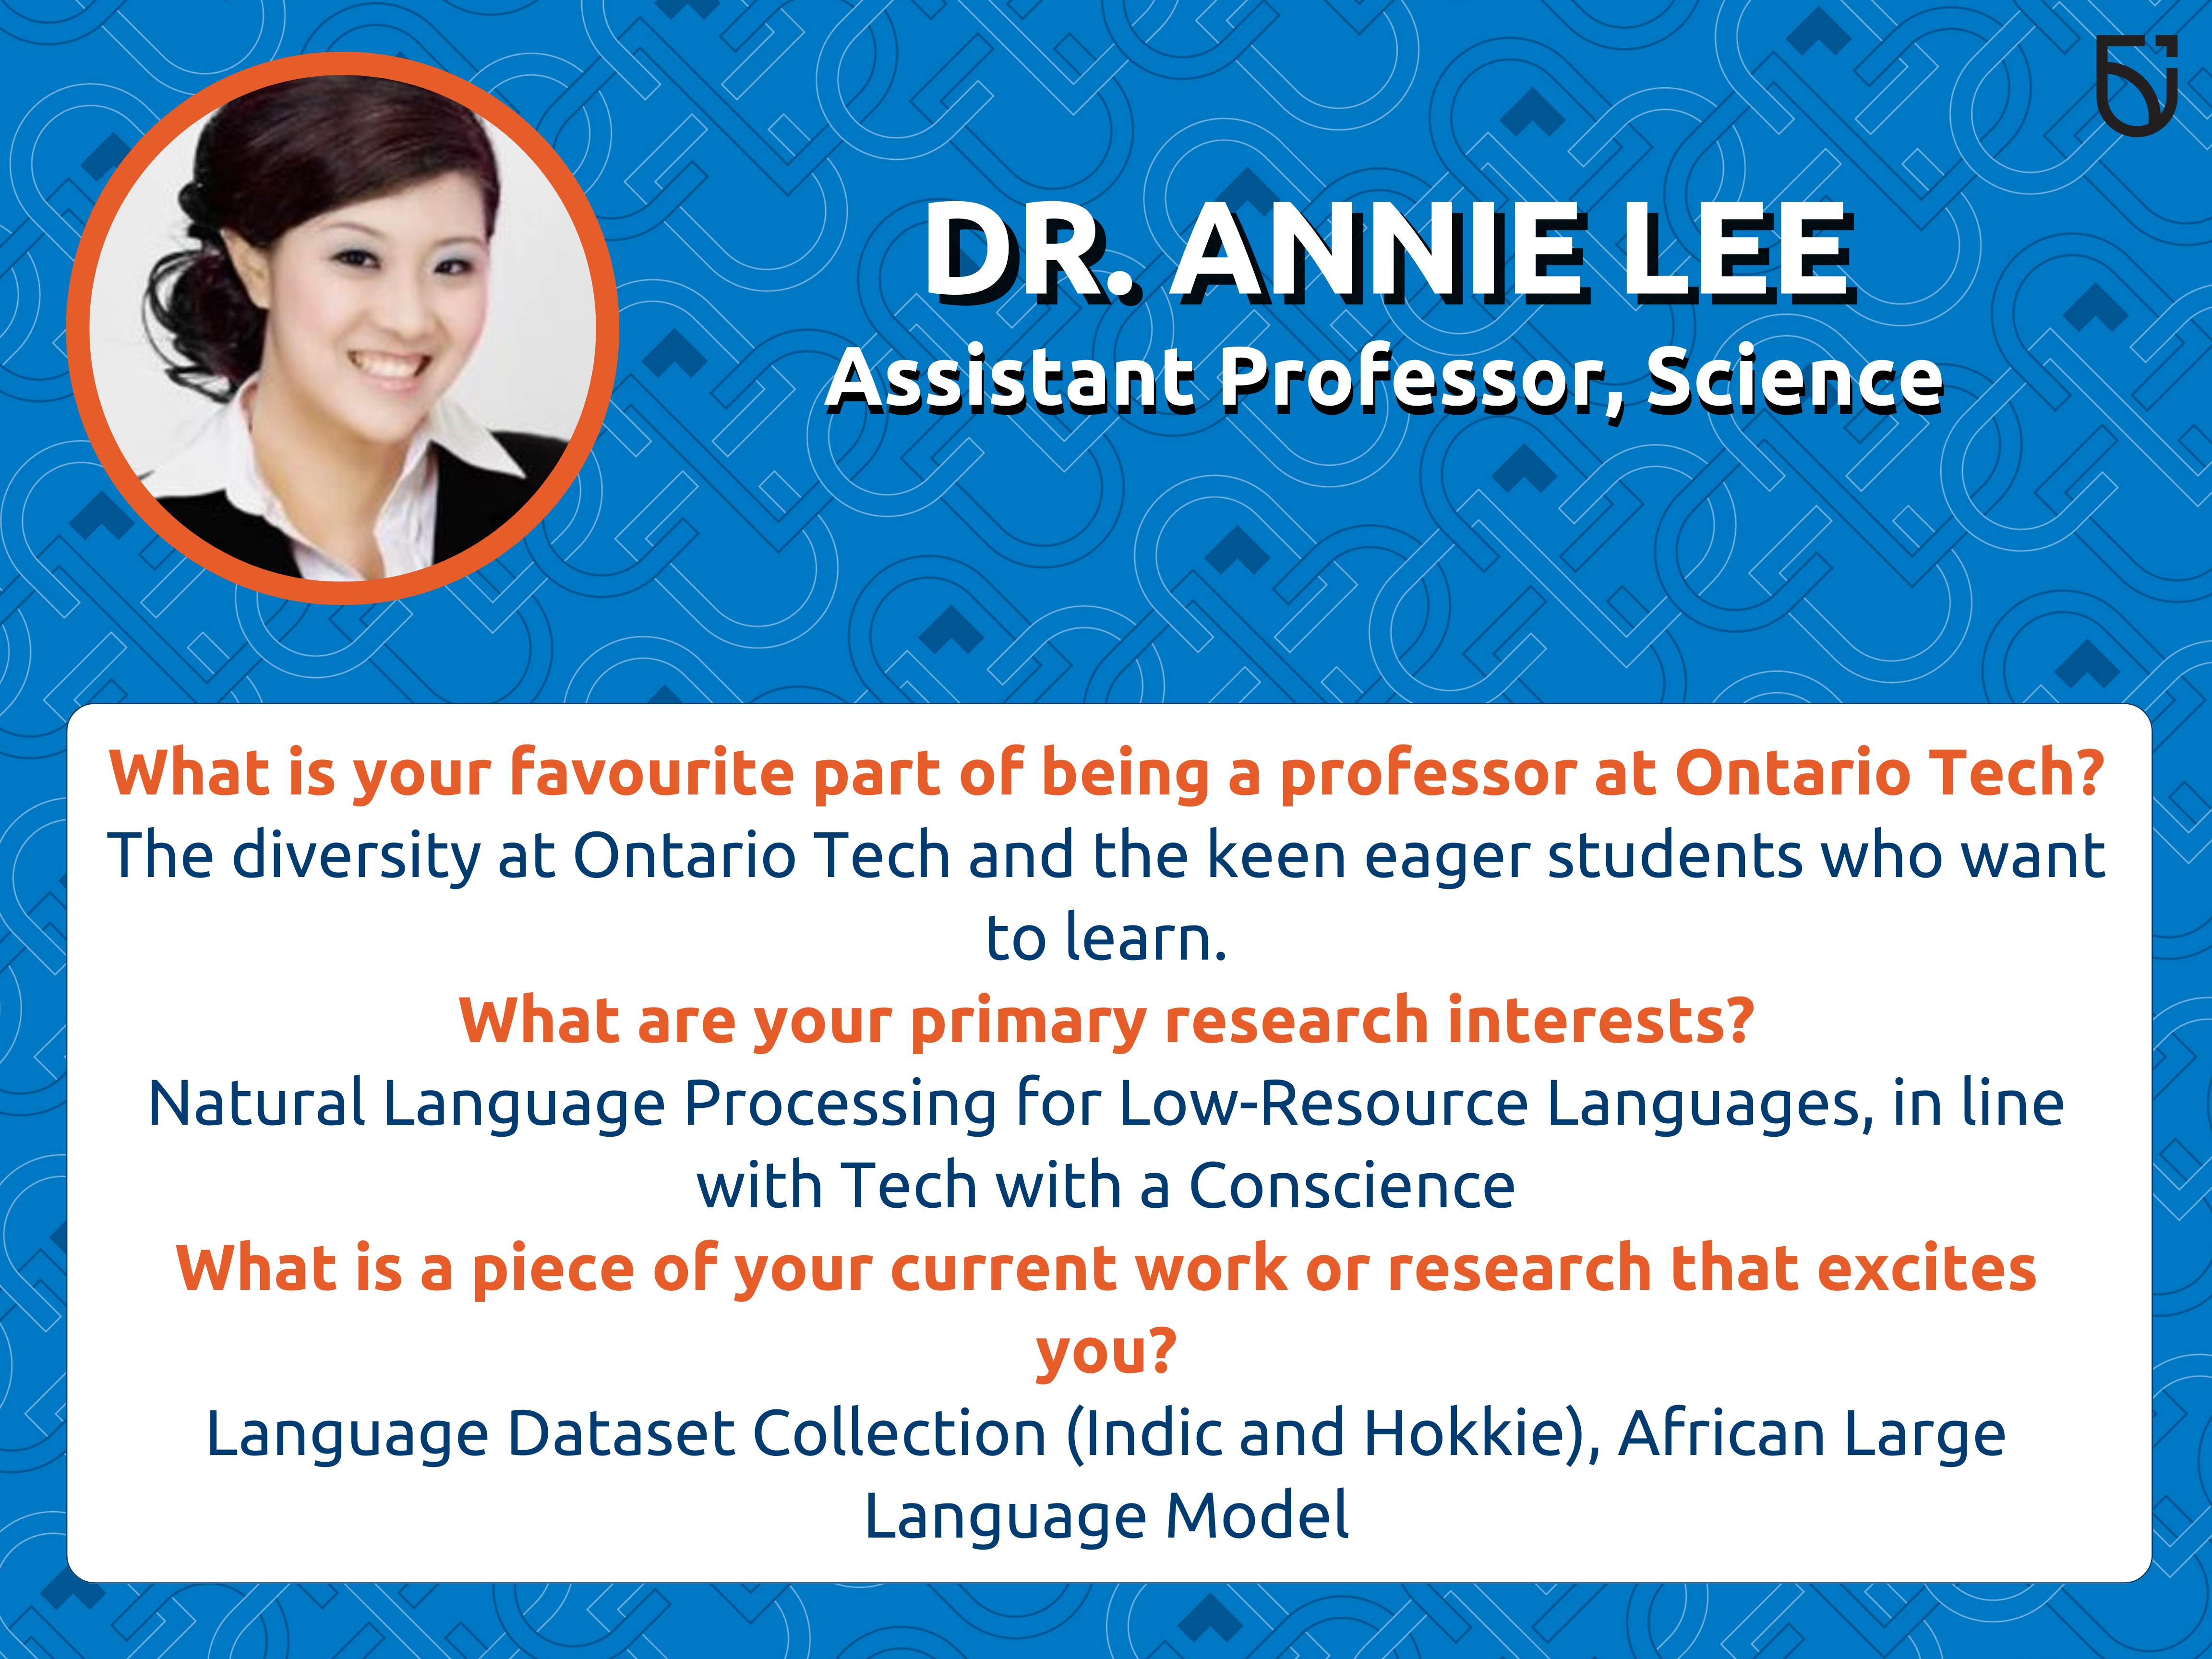 This photo is a Women’s Wednesday feature of Dr. Annie Lee, an Assistant Professor in the Faculty of Science.